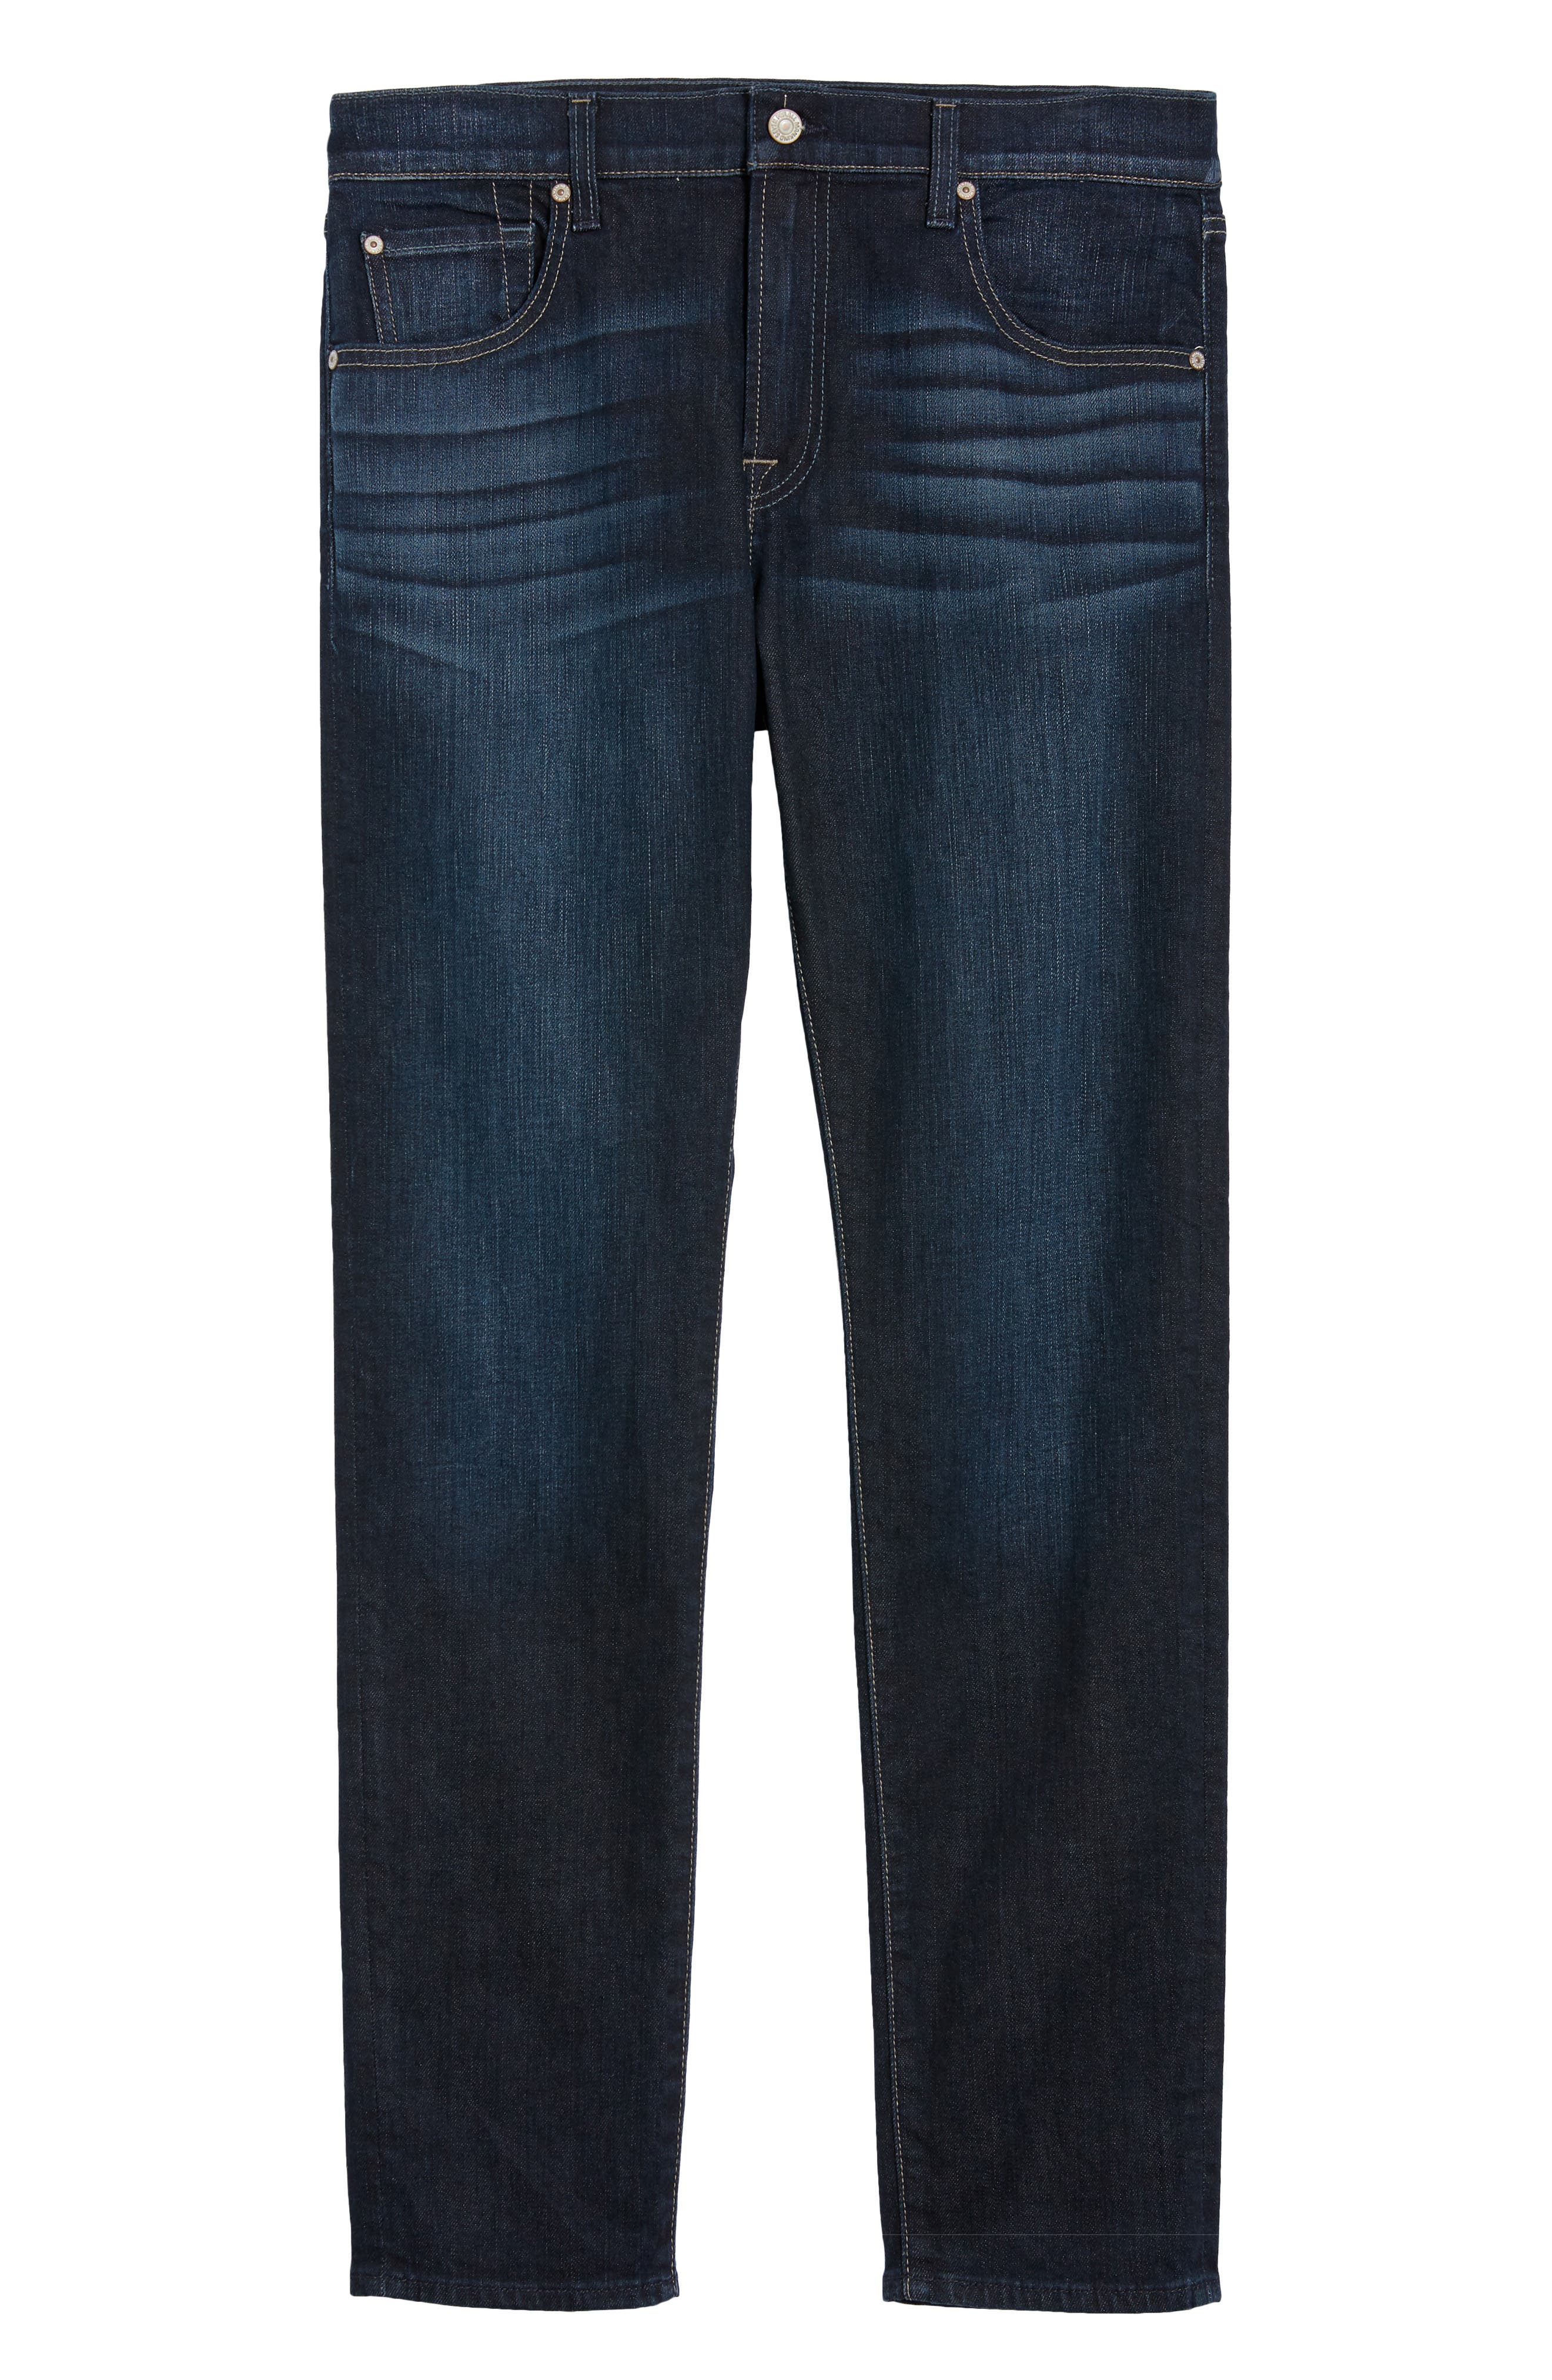 men's 7 for all mankind jeans sale